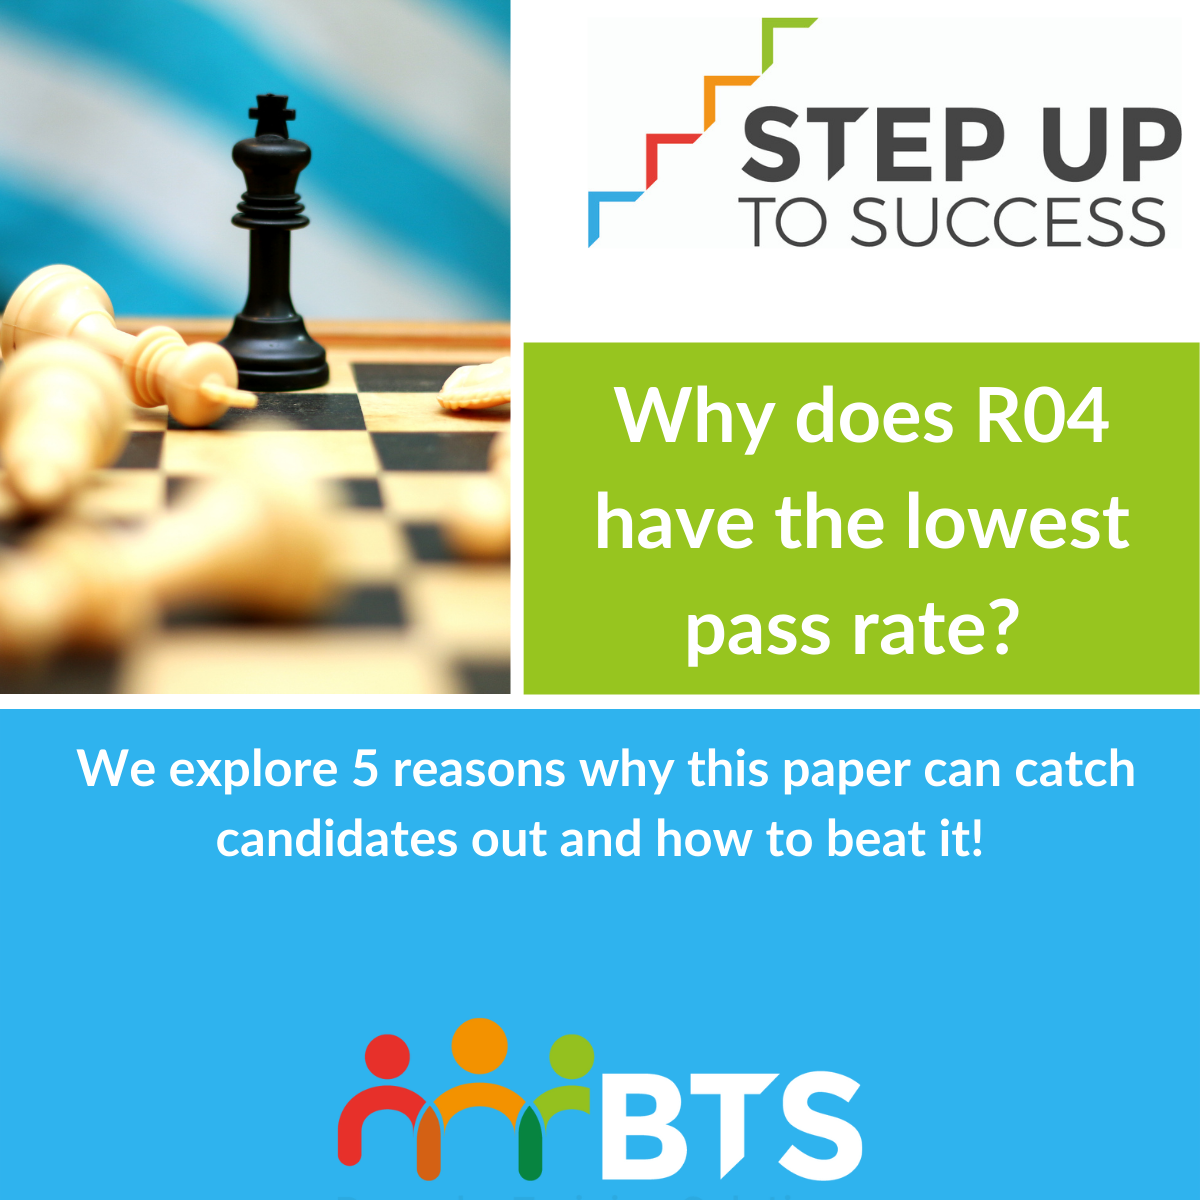 Chess pieces and the words why does the R04 have the lowest pass rate? Tips on how to pass the CII R04